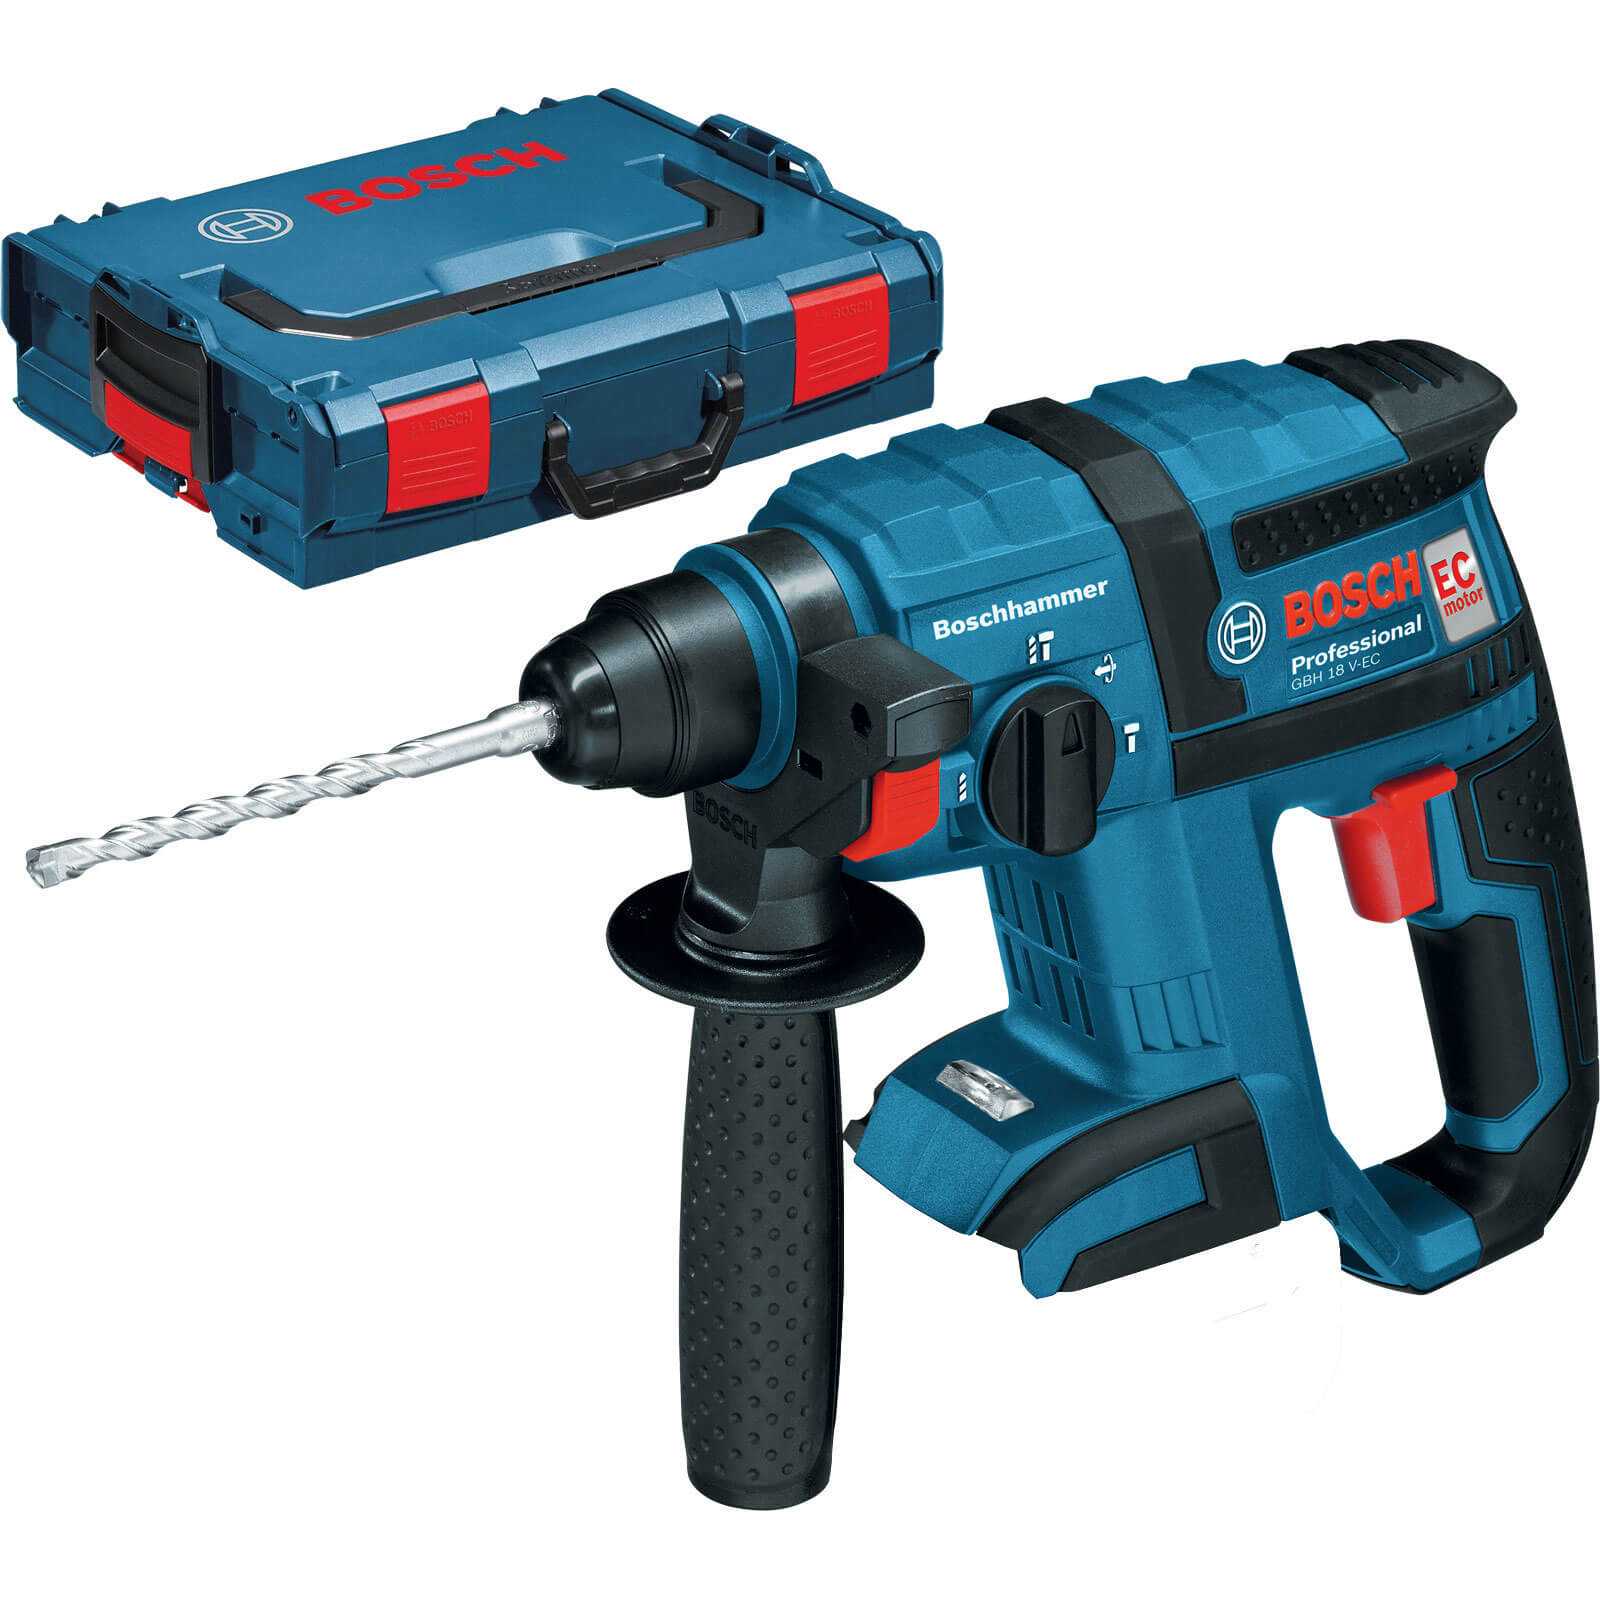 Photo of Bosch Gbh 18 V-ec 18v Cordless Sds Drill No Batteries No Charger Case